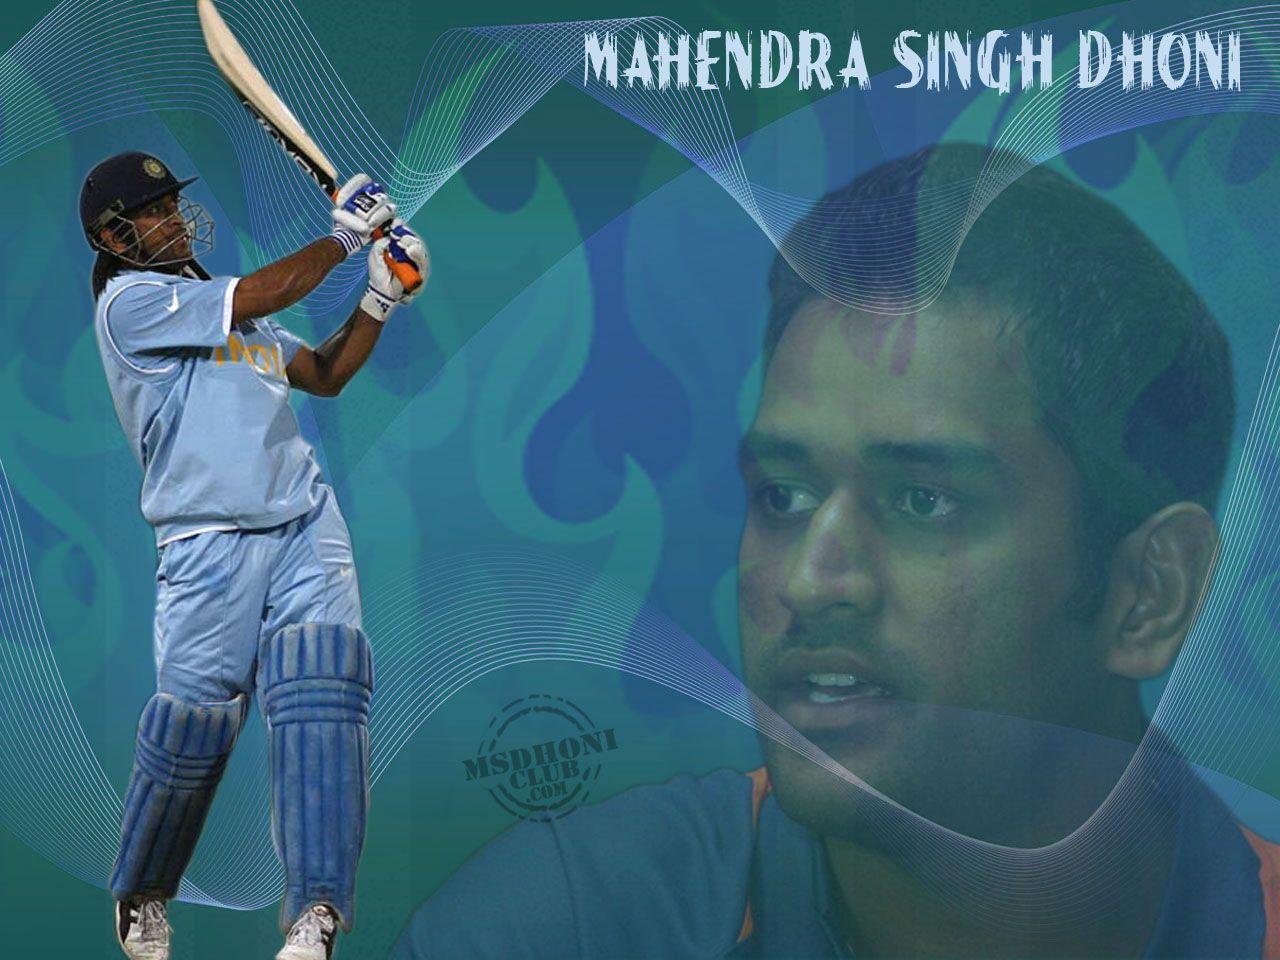 Top Three MS Dhoni HD Pics For Timeline and Fb Covers